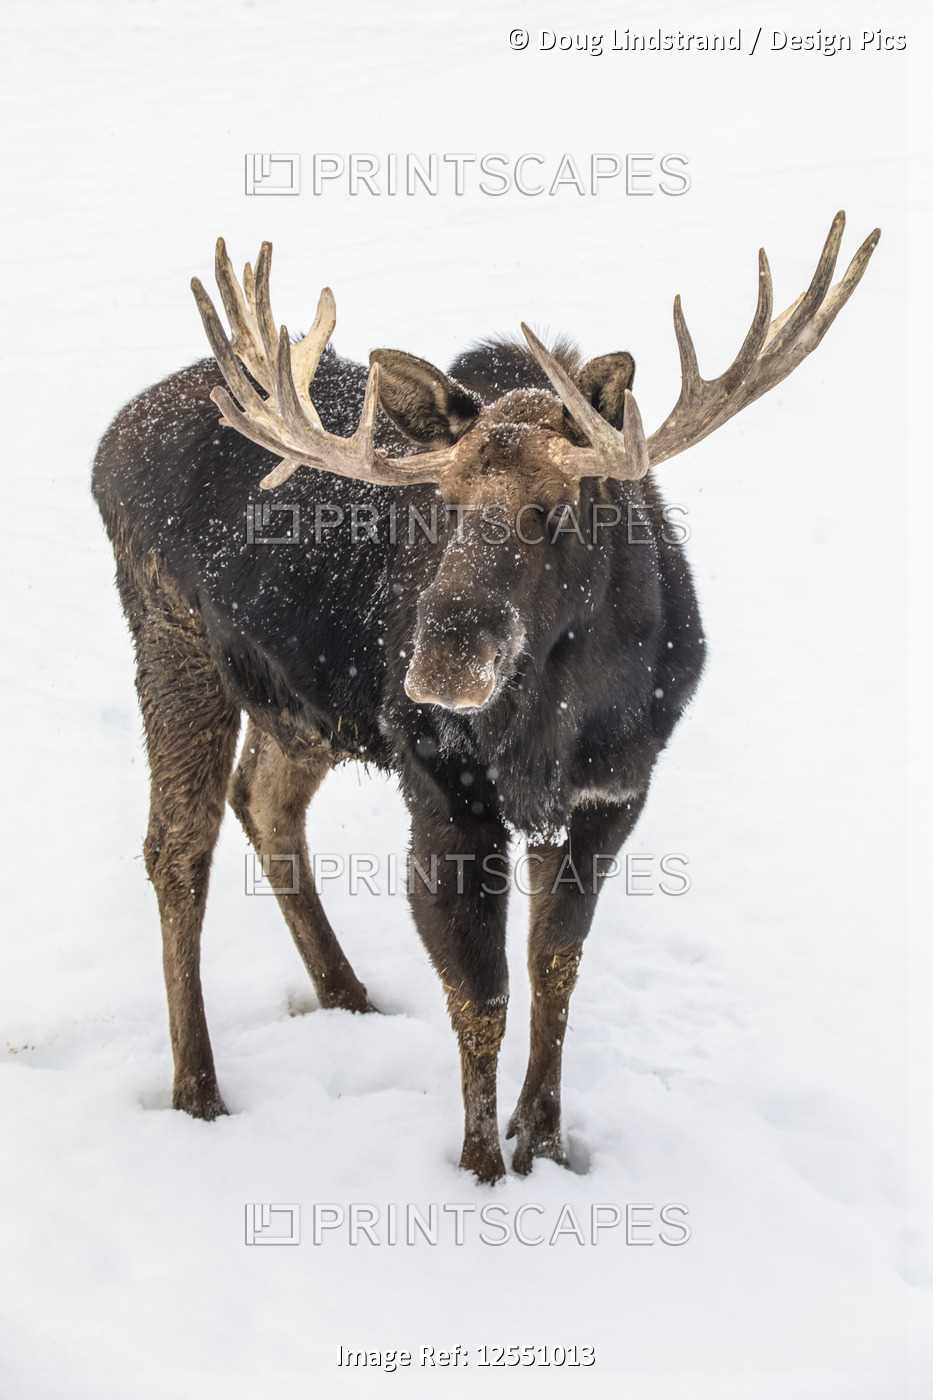 Mature bull moose (Alces alces) with antlers shed of velvet standing in snow, ...